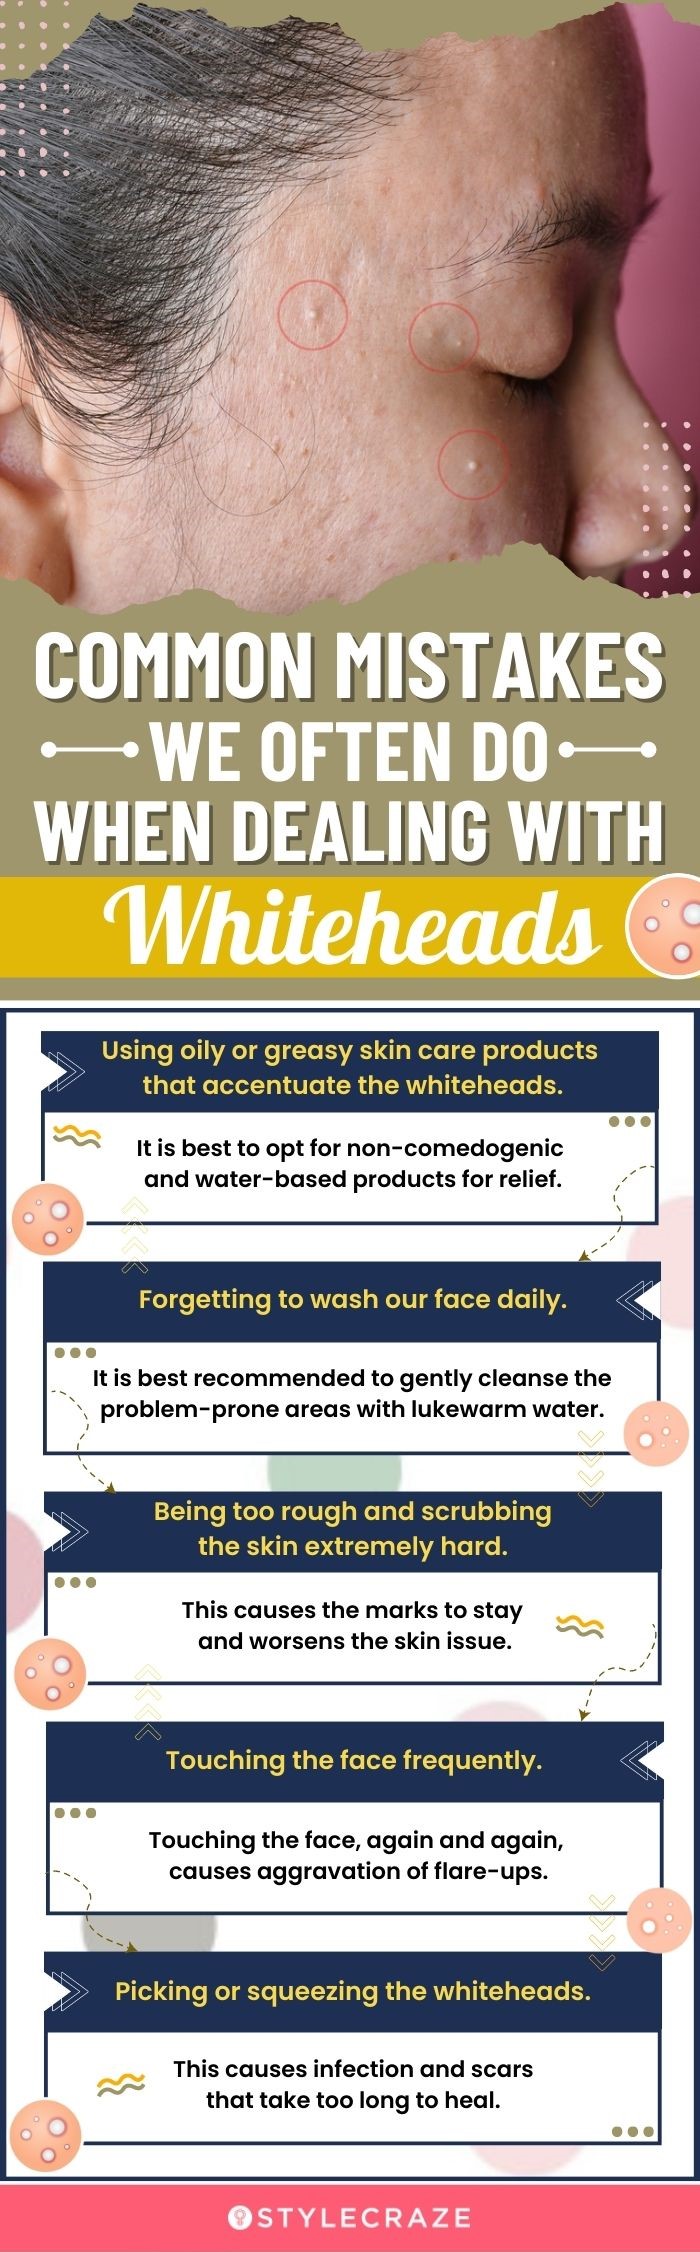 Common Mistakes We Often Do When Dealing With Whiteheads(infographic)